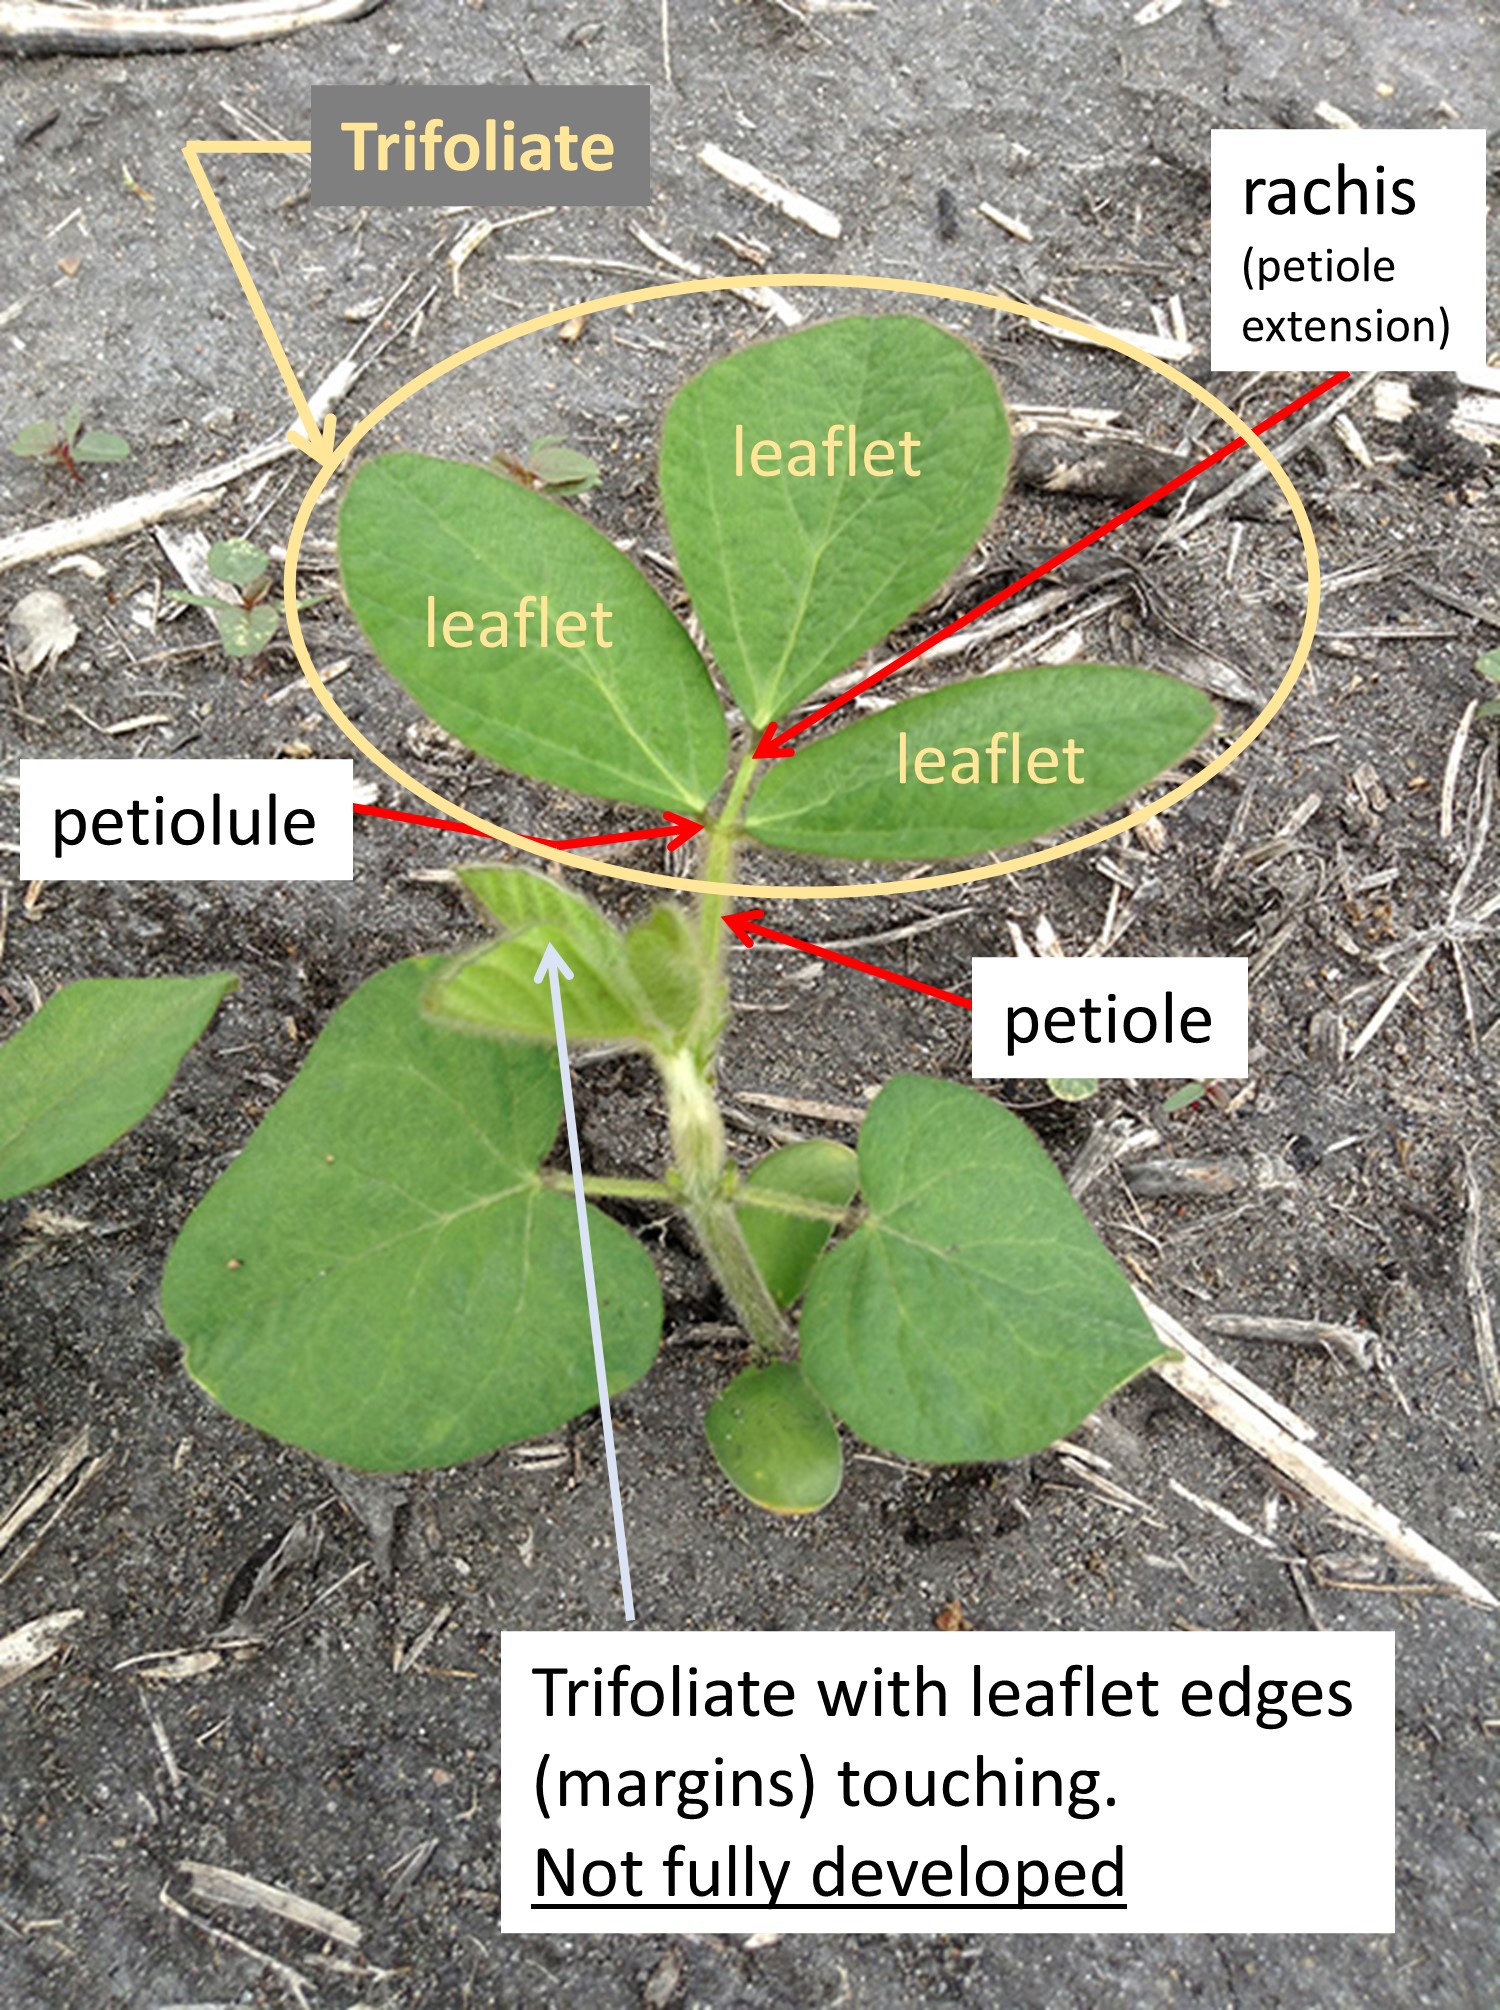 soybean plant with text indicating trifoliate leaves